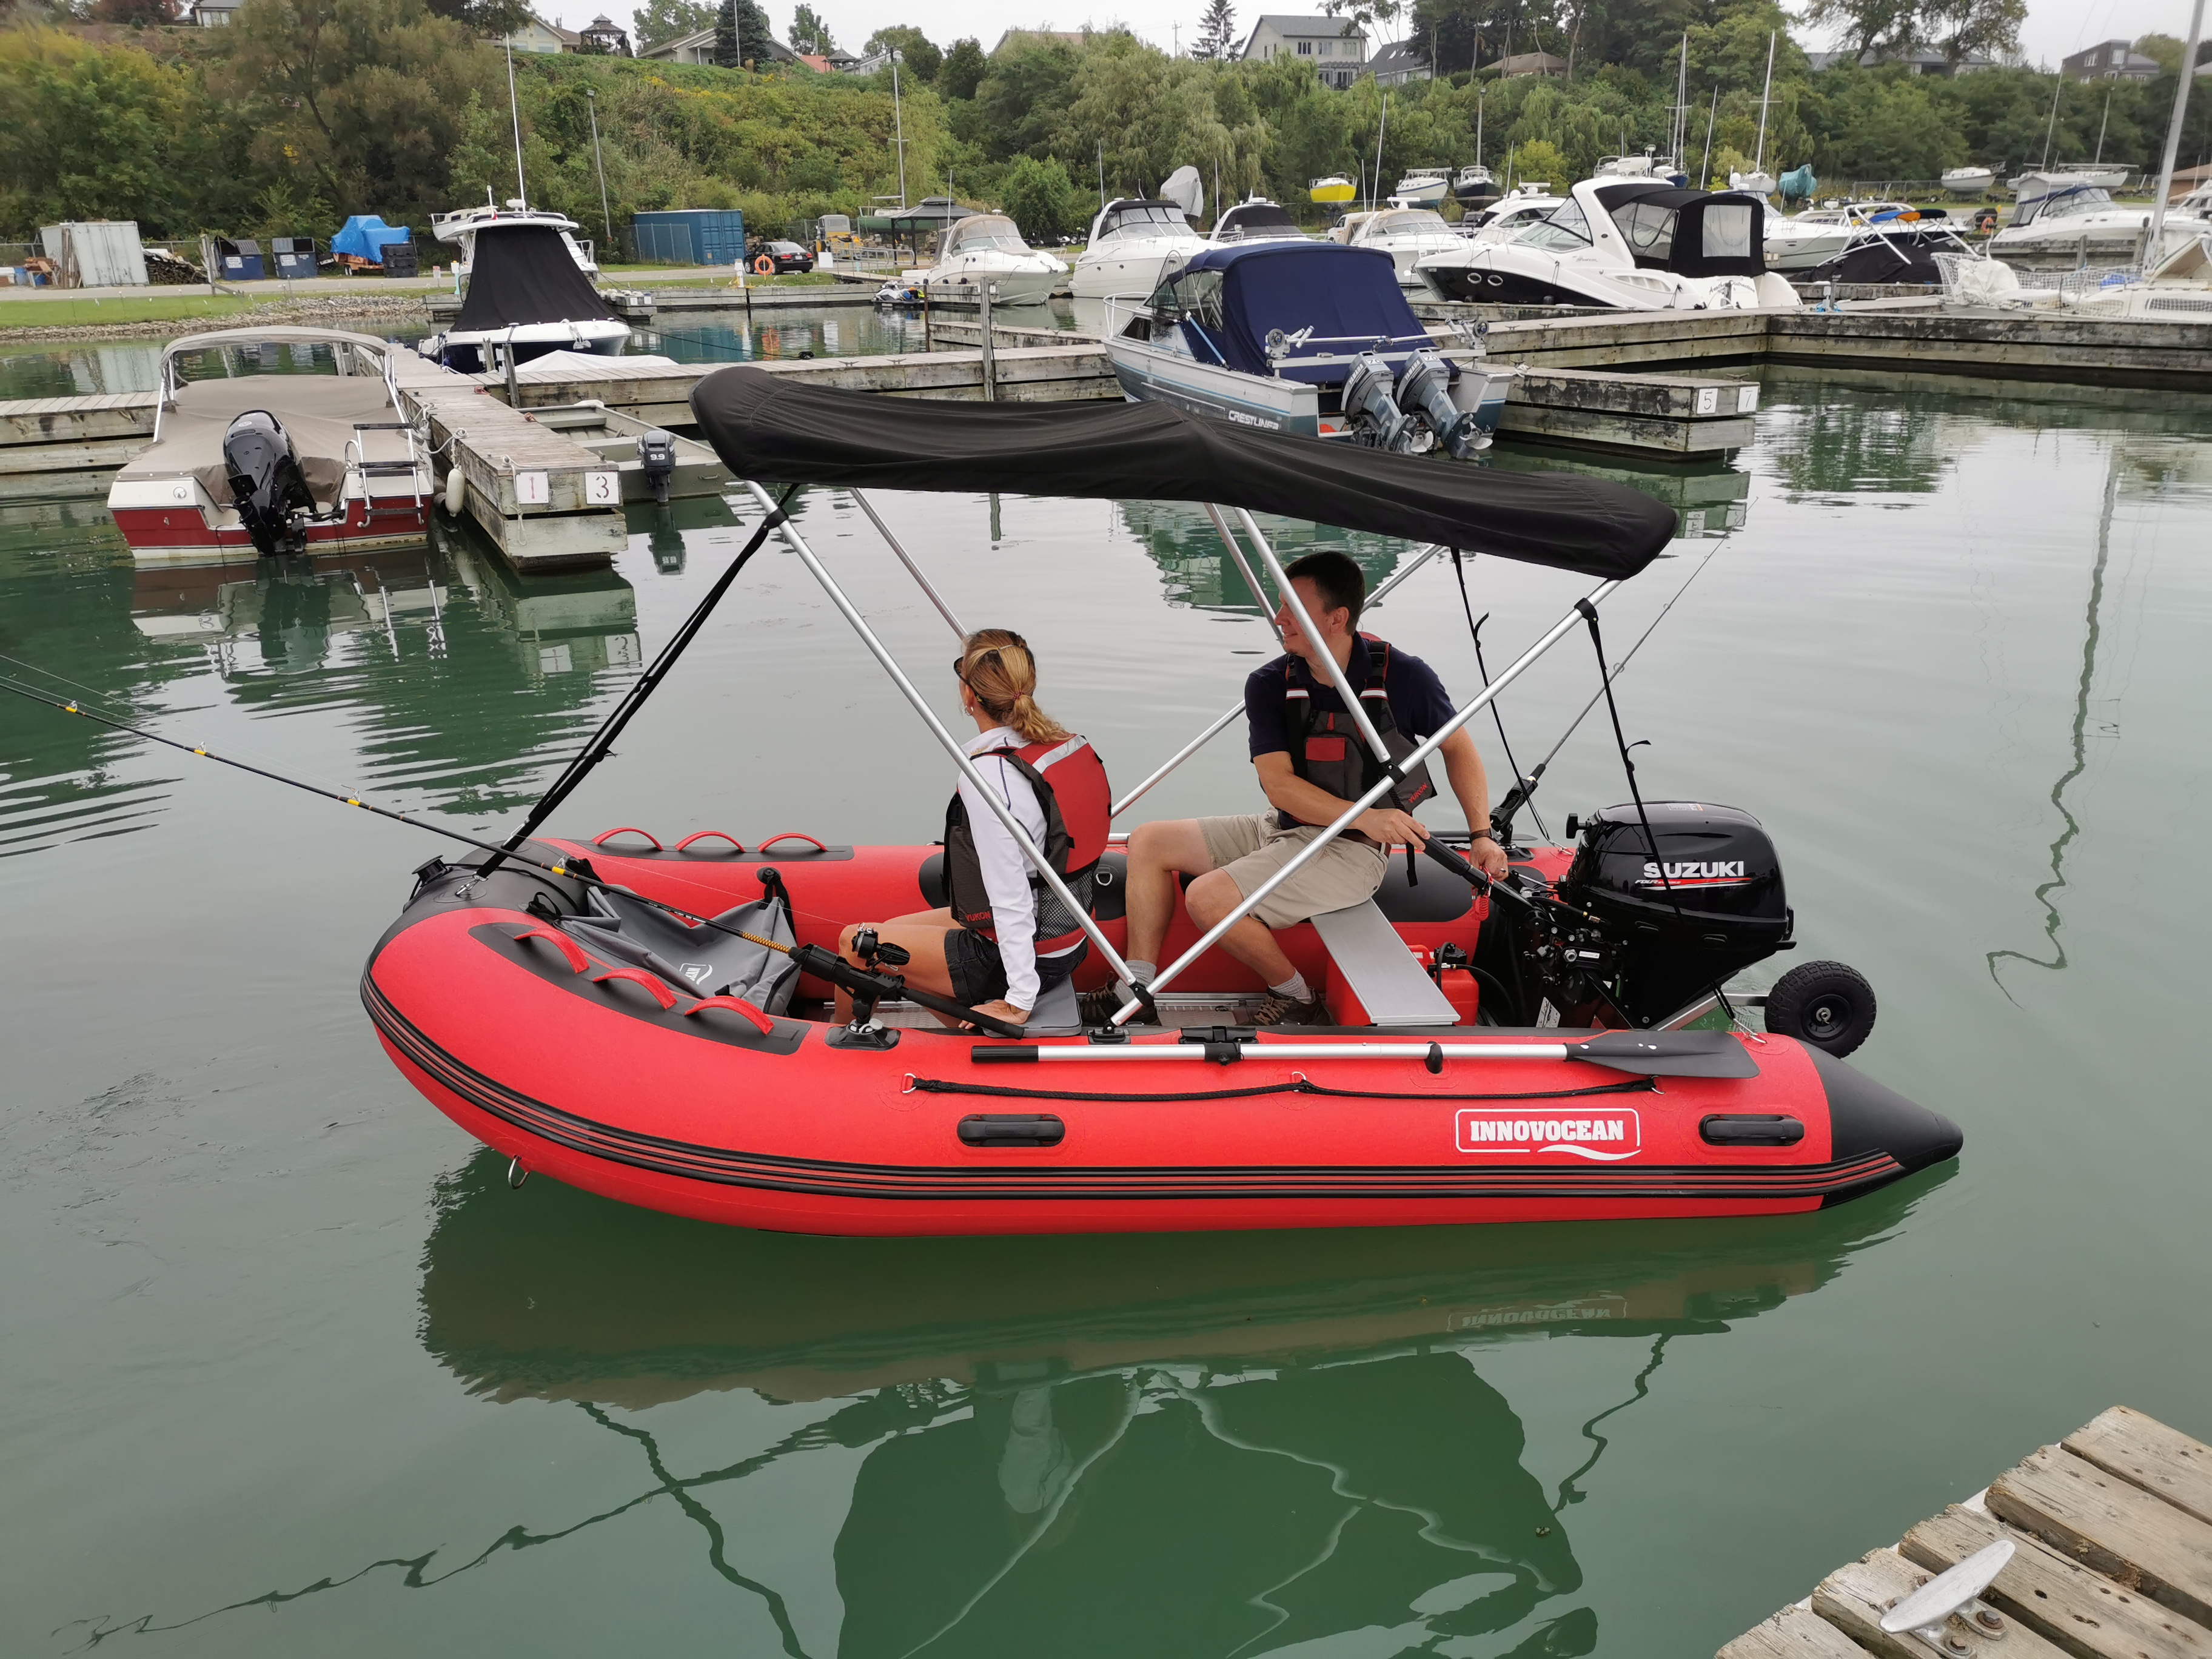 INNOVOCEAN Metal Master Series Inflatable Boats - Specially